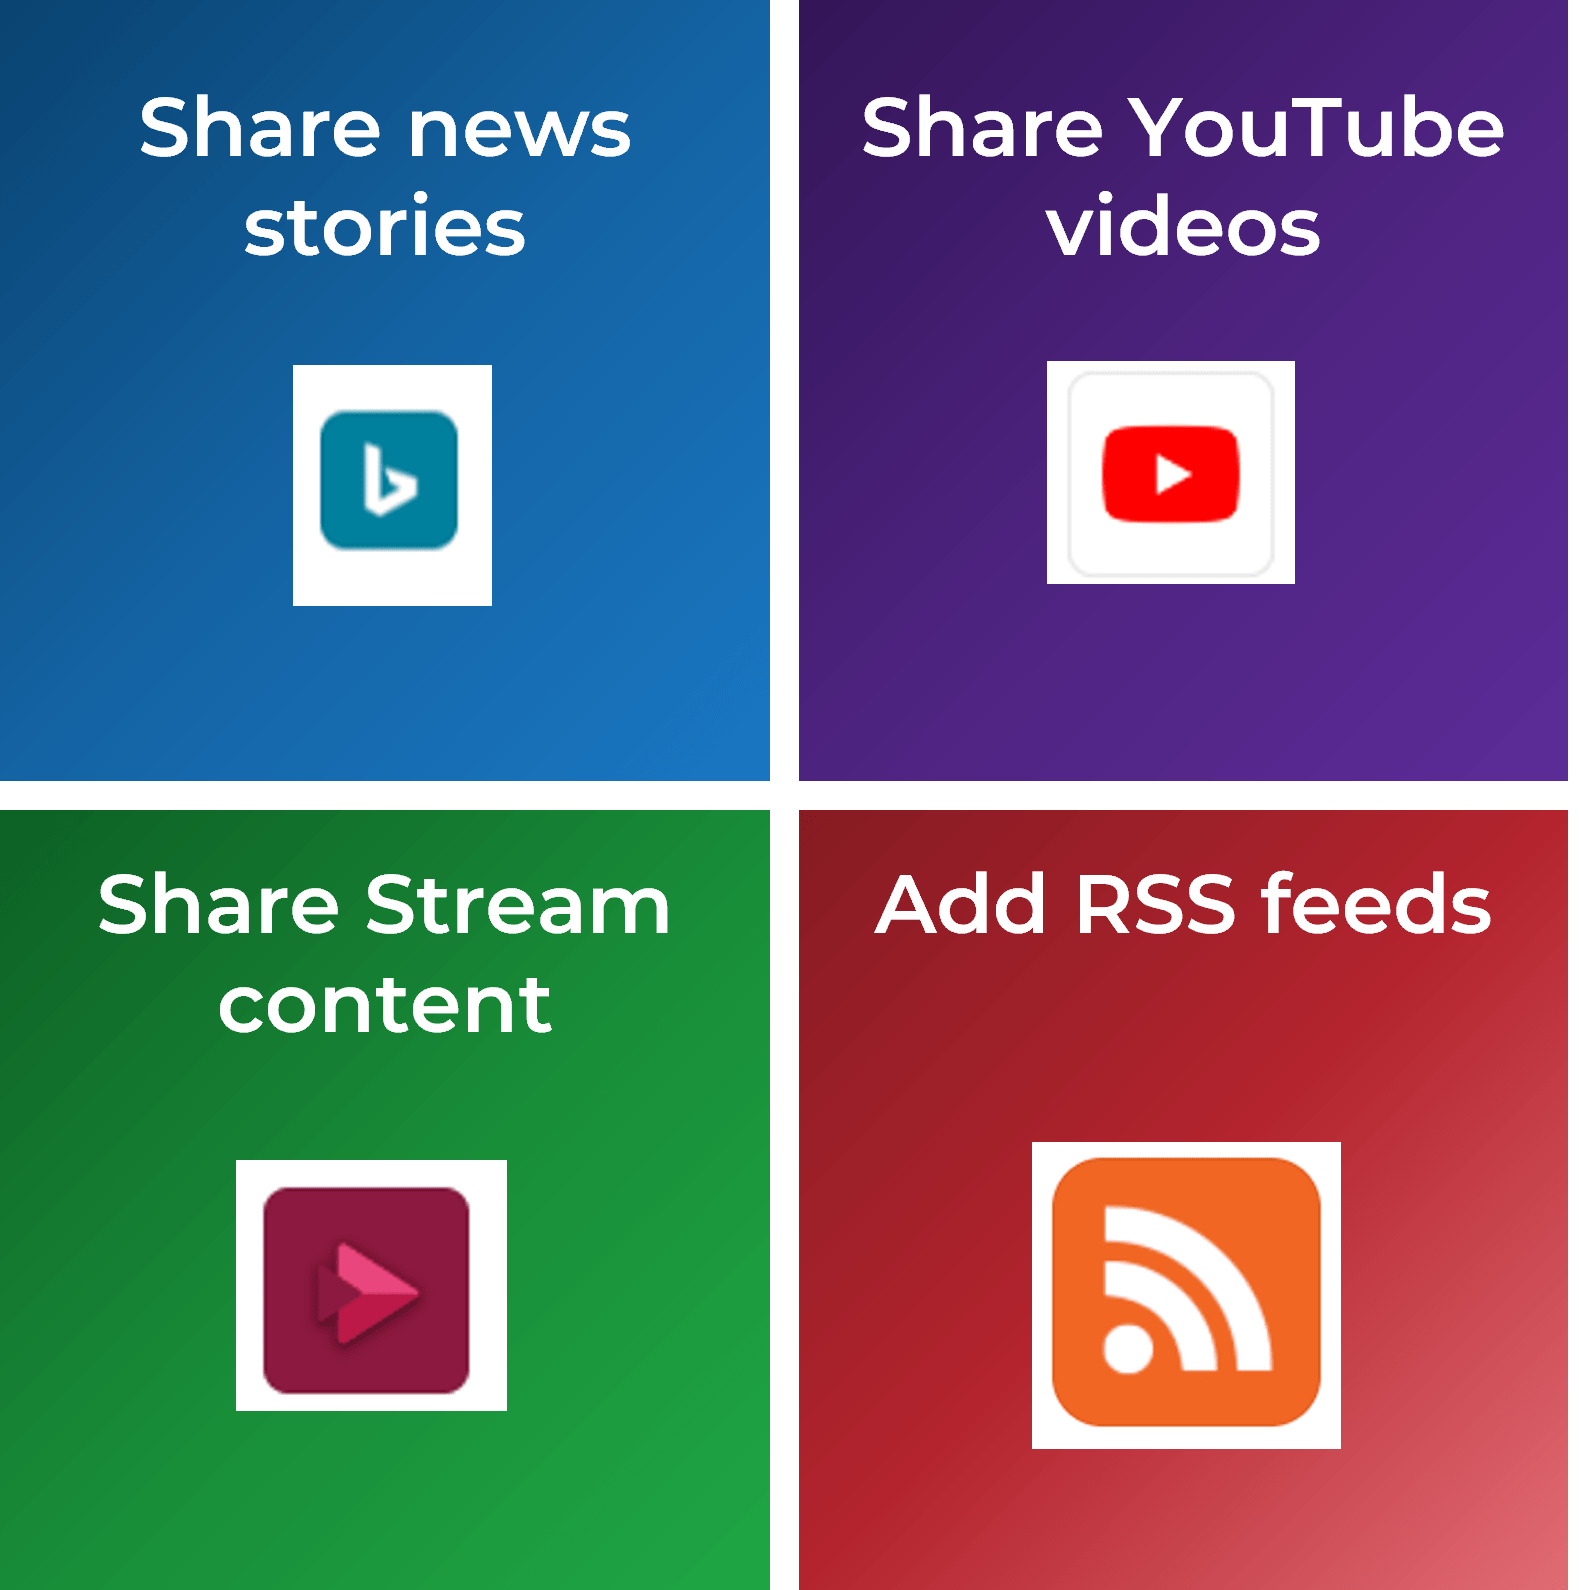 Samples of four features: 'Share news stories', 'Share YouTube videos', 'Share Stream content', and 'Add RSS feeds'.